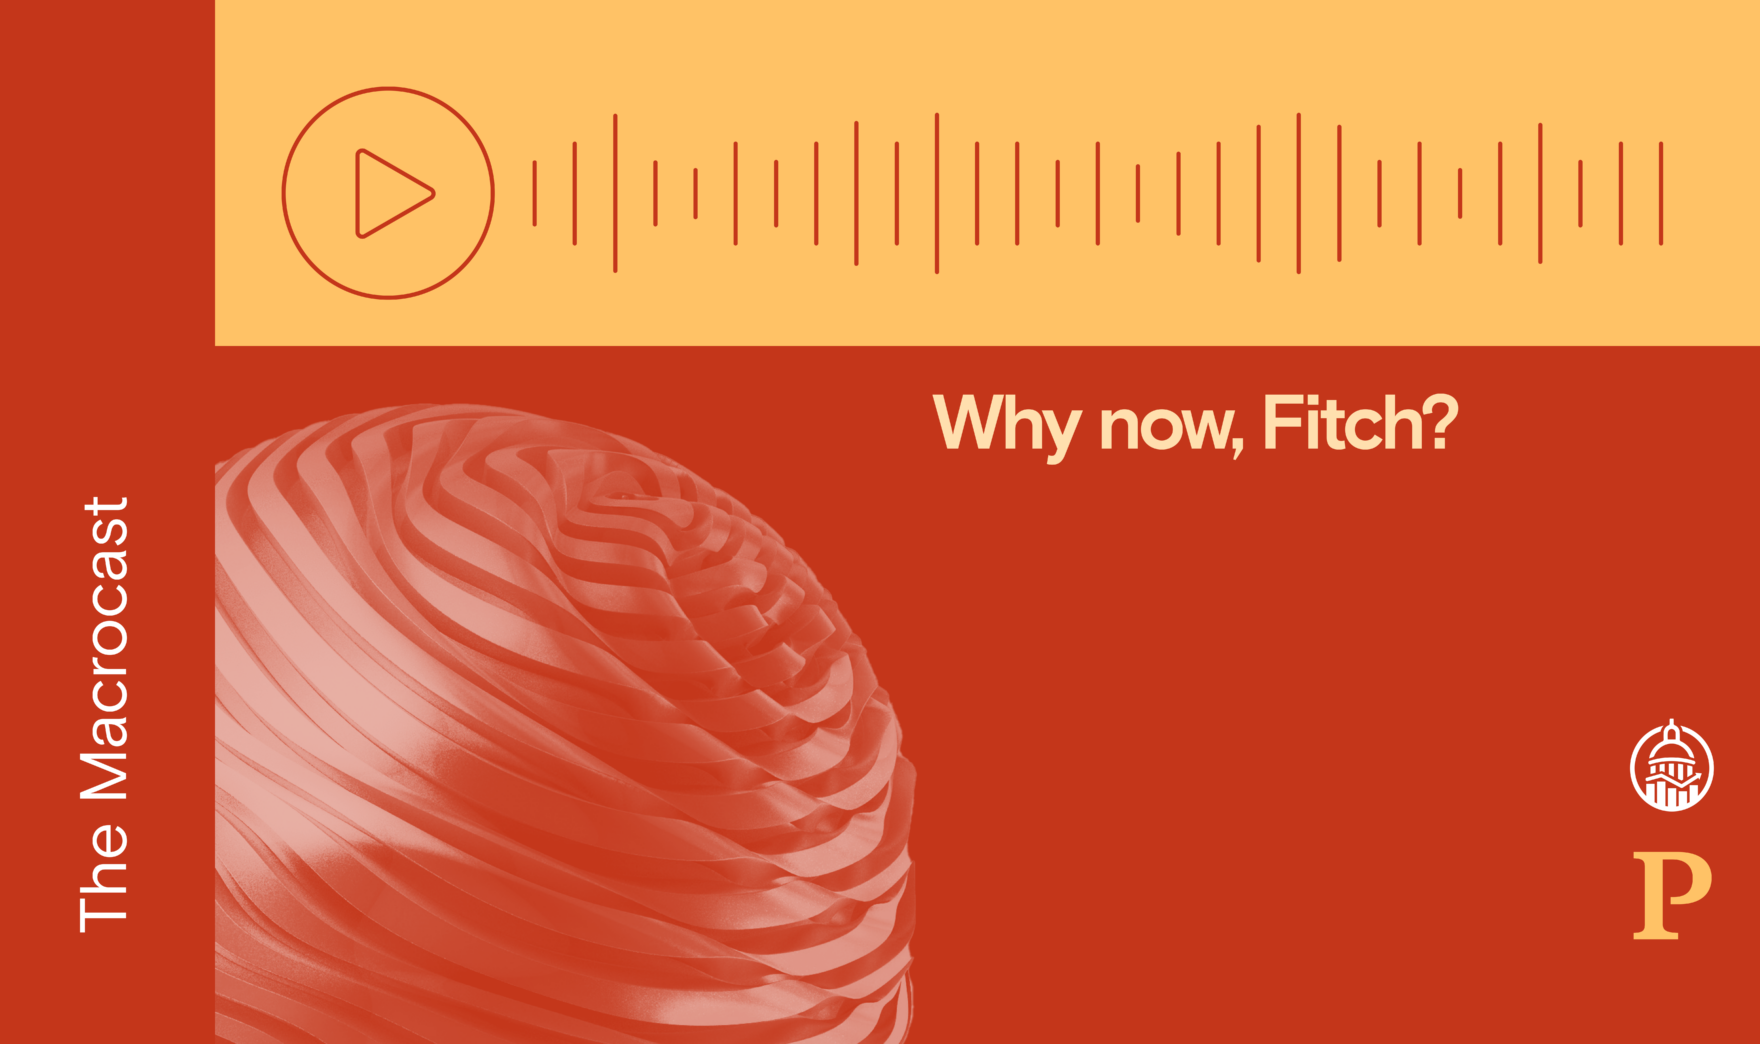 Why now, Fitch?